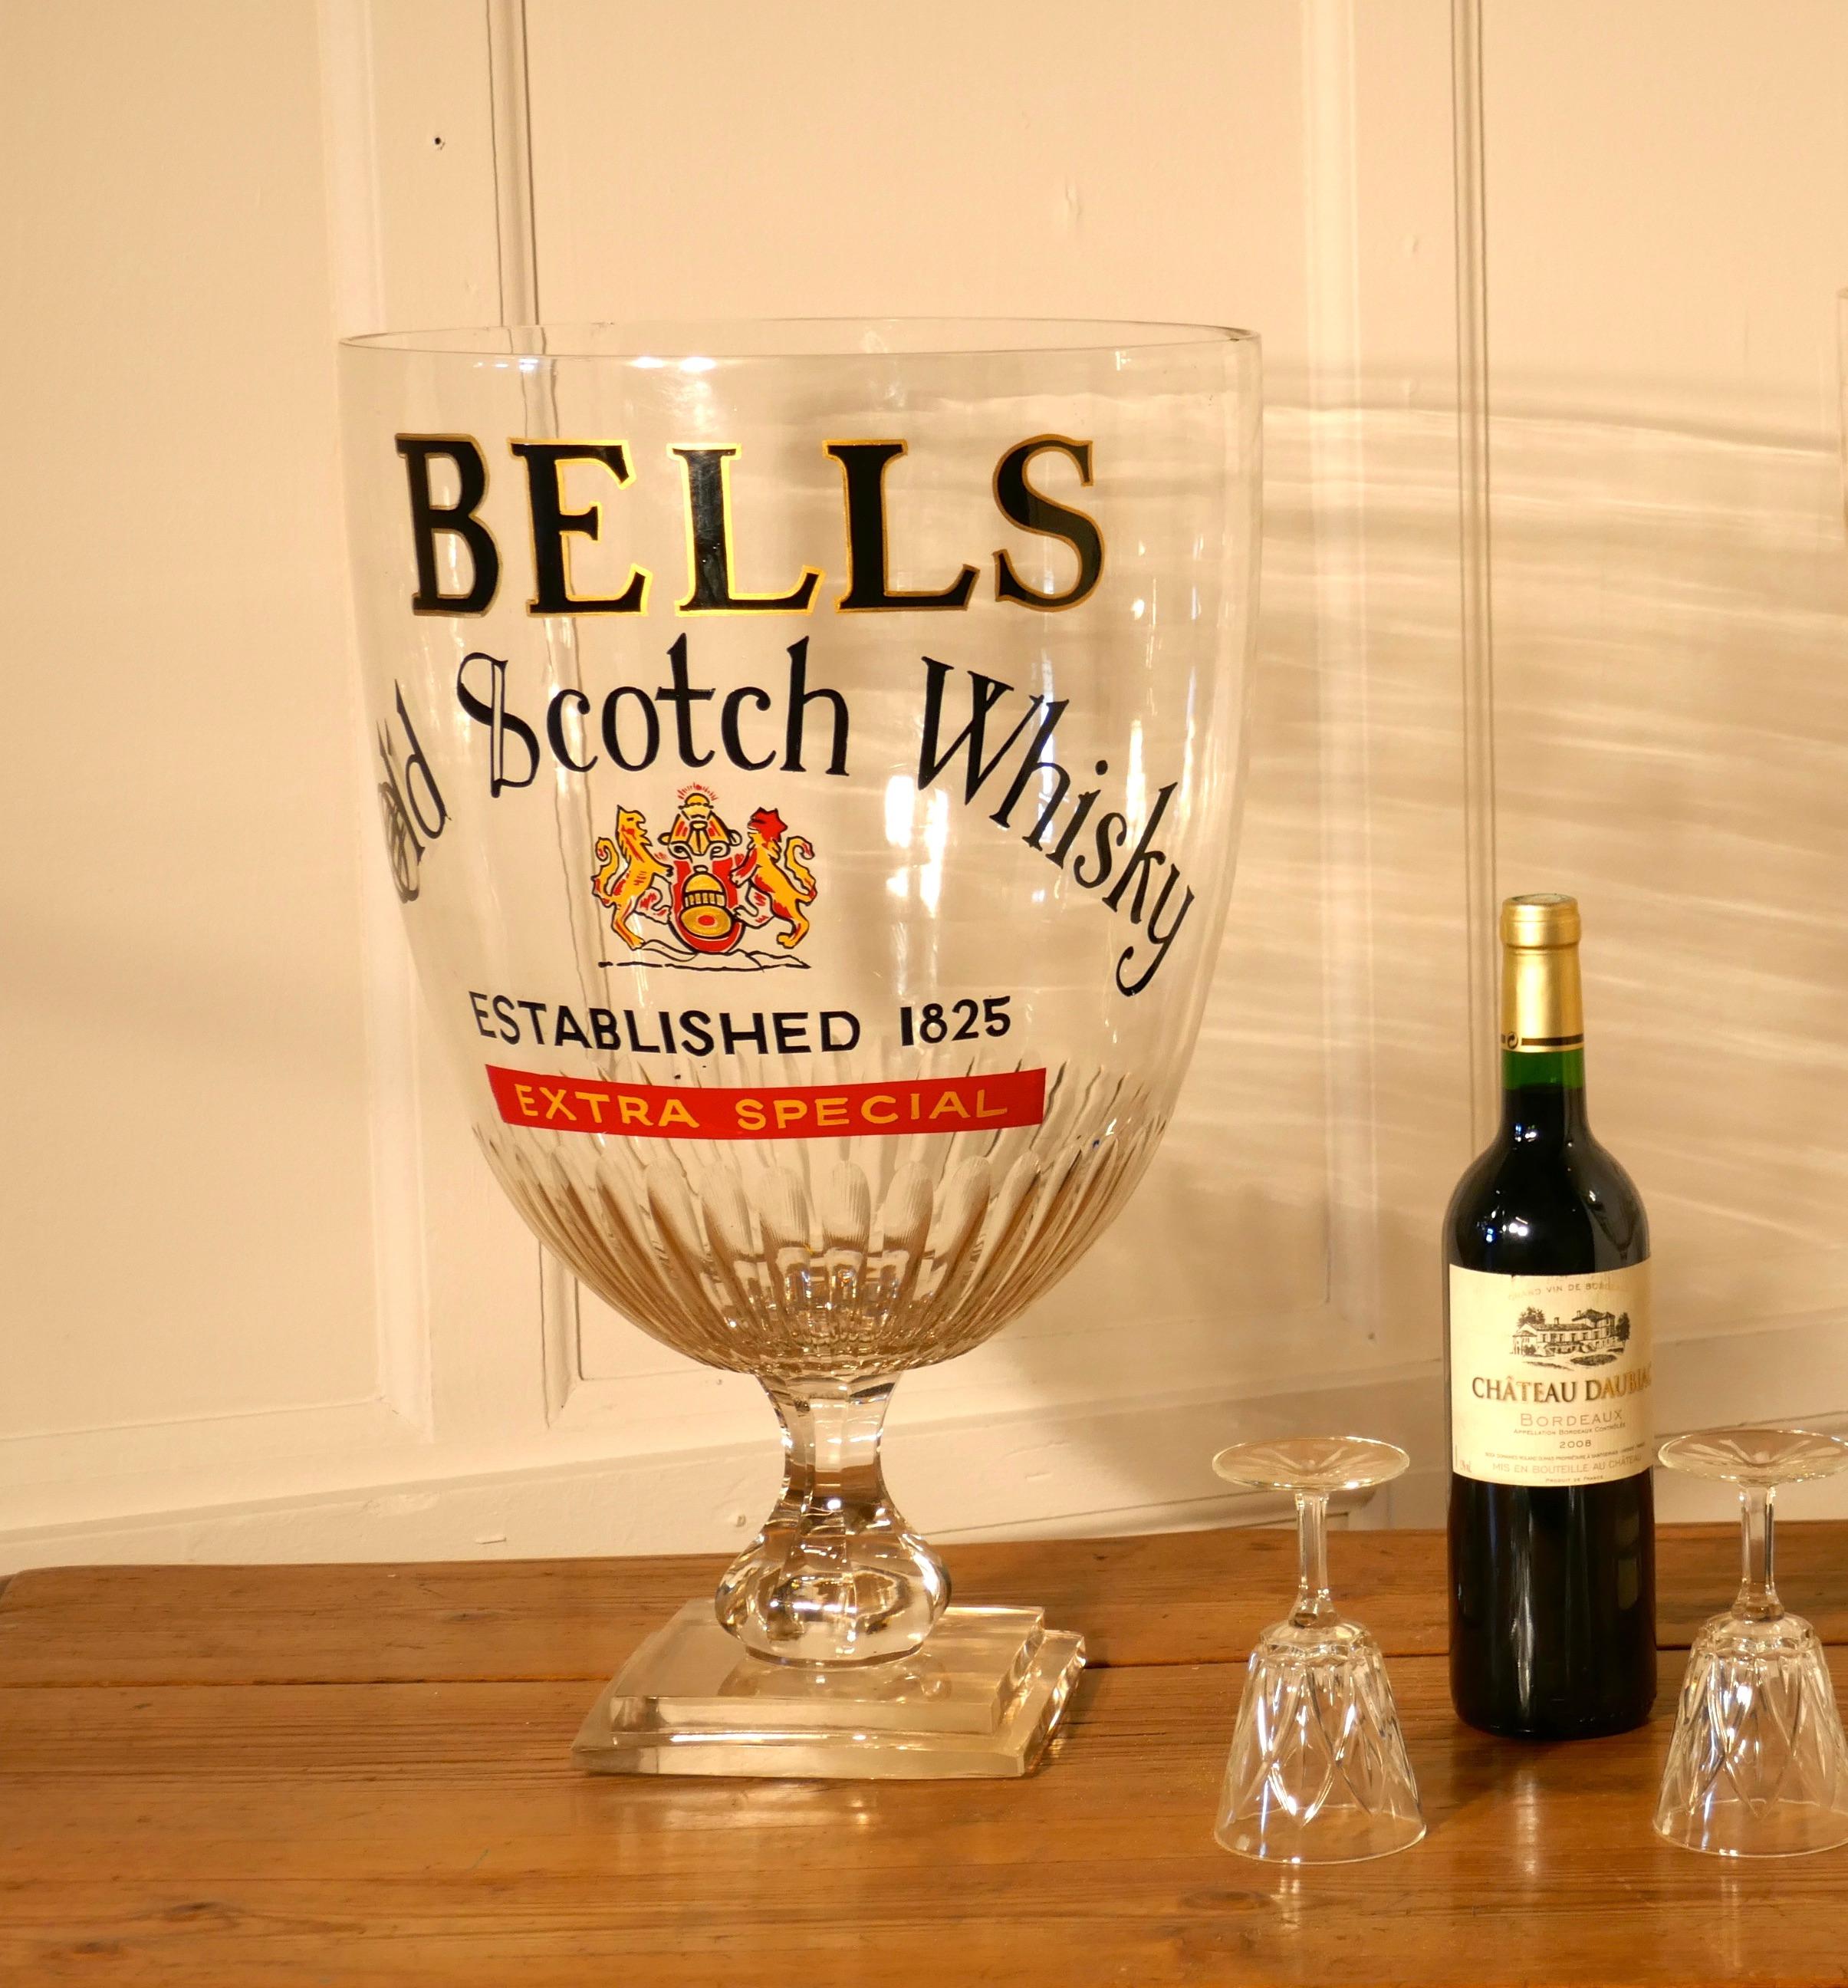 Giant Advertising Presentation Glass Chalice for Bells Scotch Whisky


This is an oversized Glass, made for Pub or Bar display advertising. 
The glass stands on a thick stepped square base, it has a fluted bowl and is 20” high
It is advertising